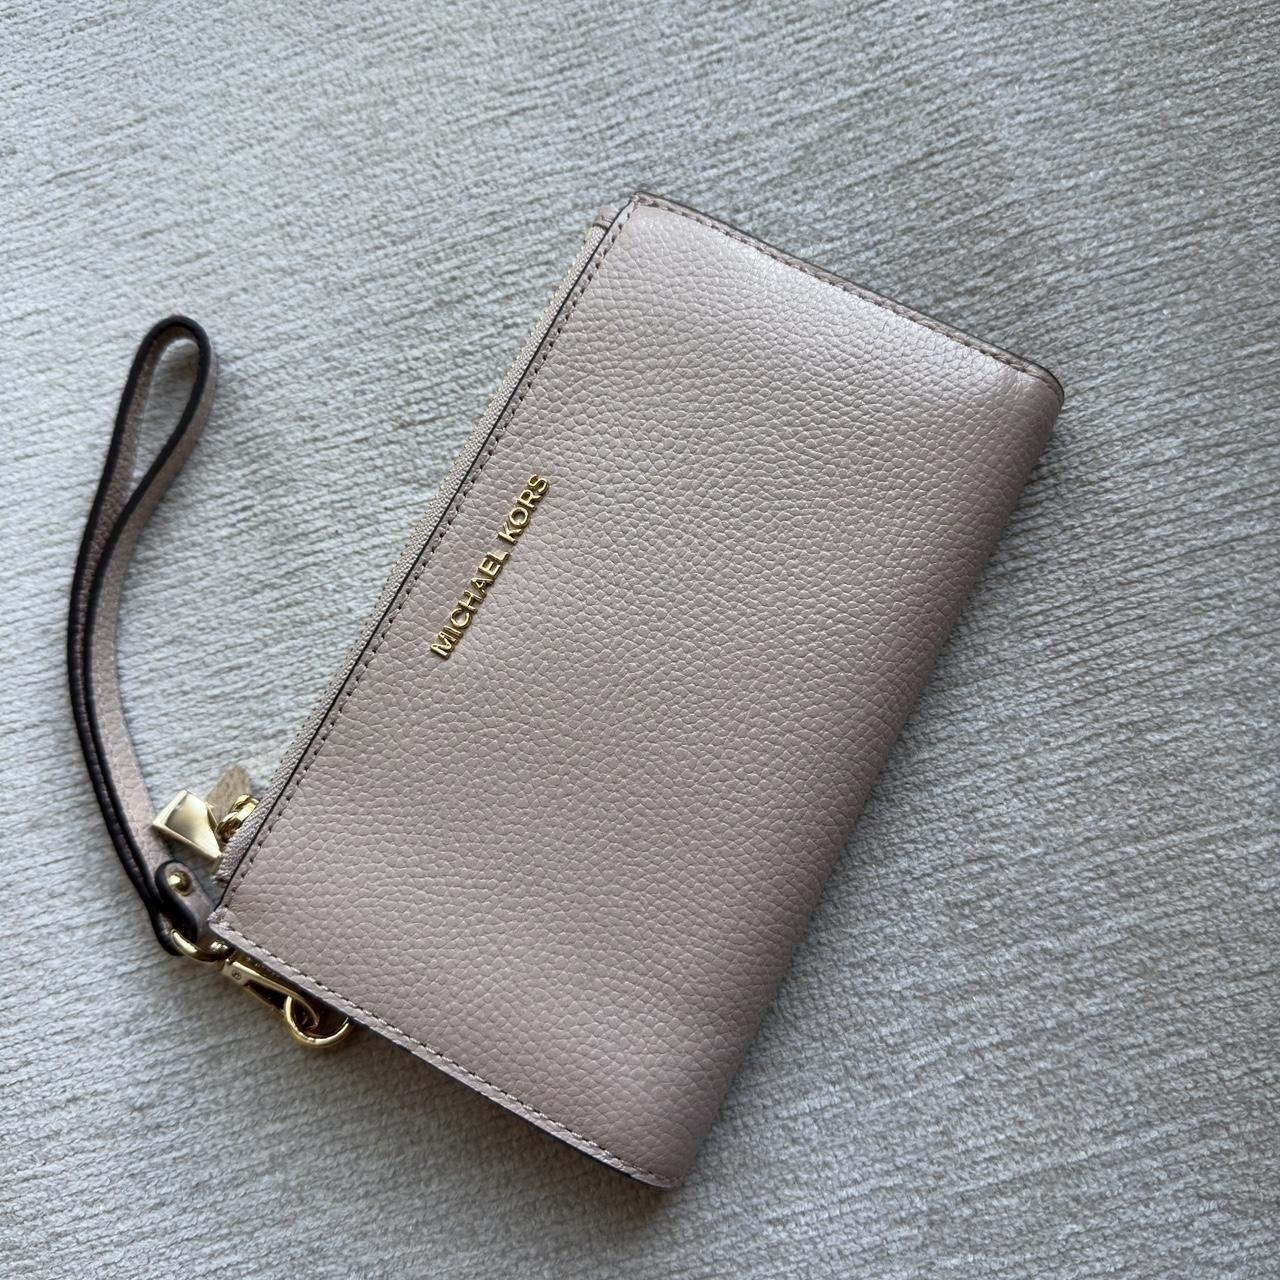 Wallet Designer By Michael Kors Size: Small